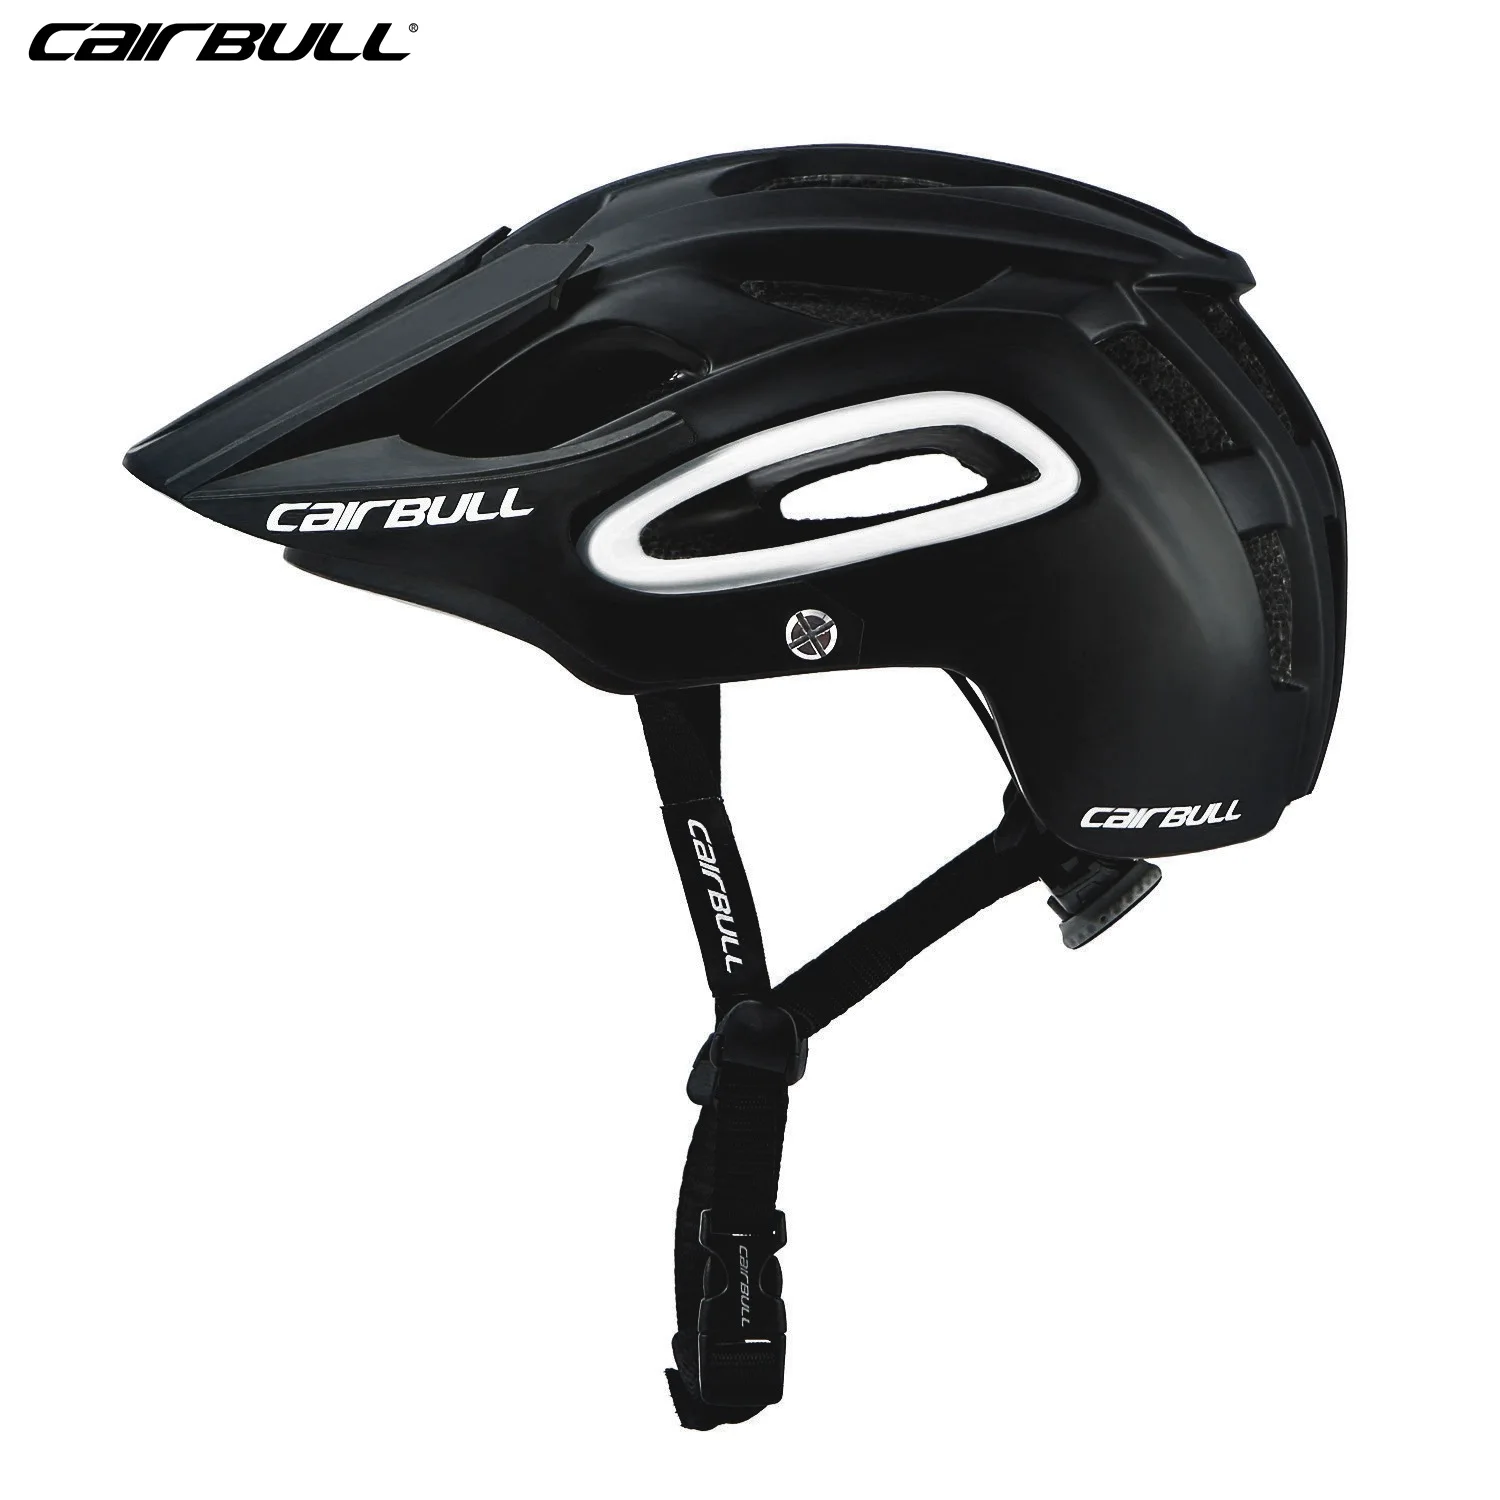 CAIRBULL Men & Women Bicycle Helmets Outdoor Sporting Helmets With 18 Vents 